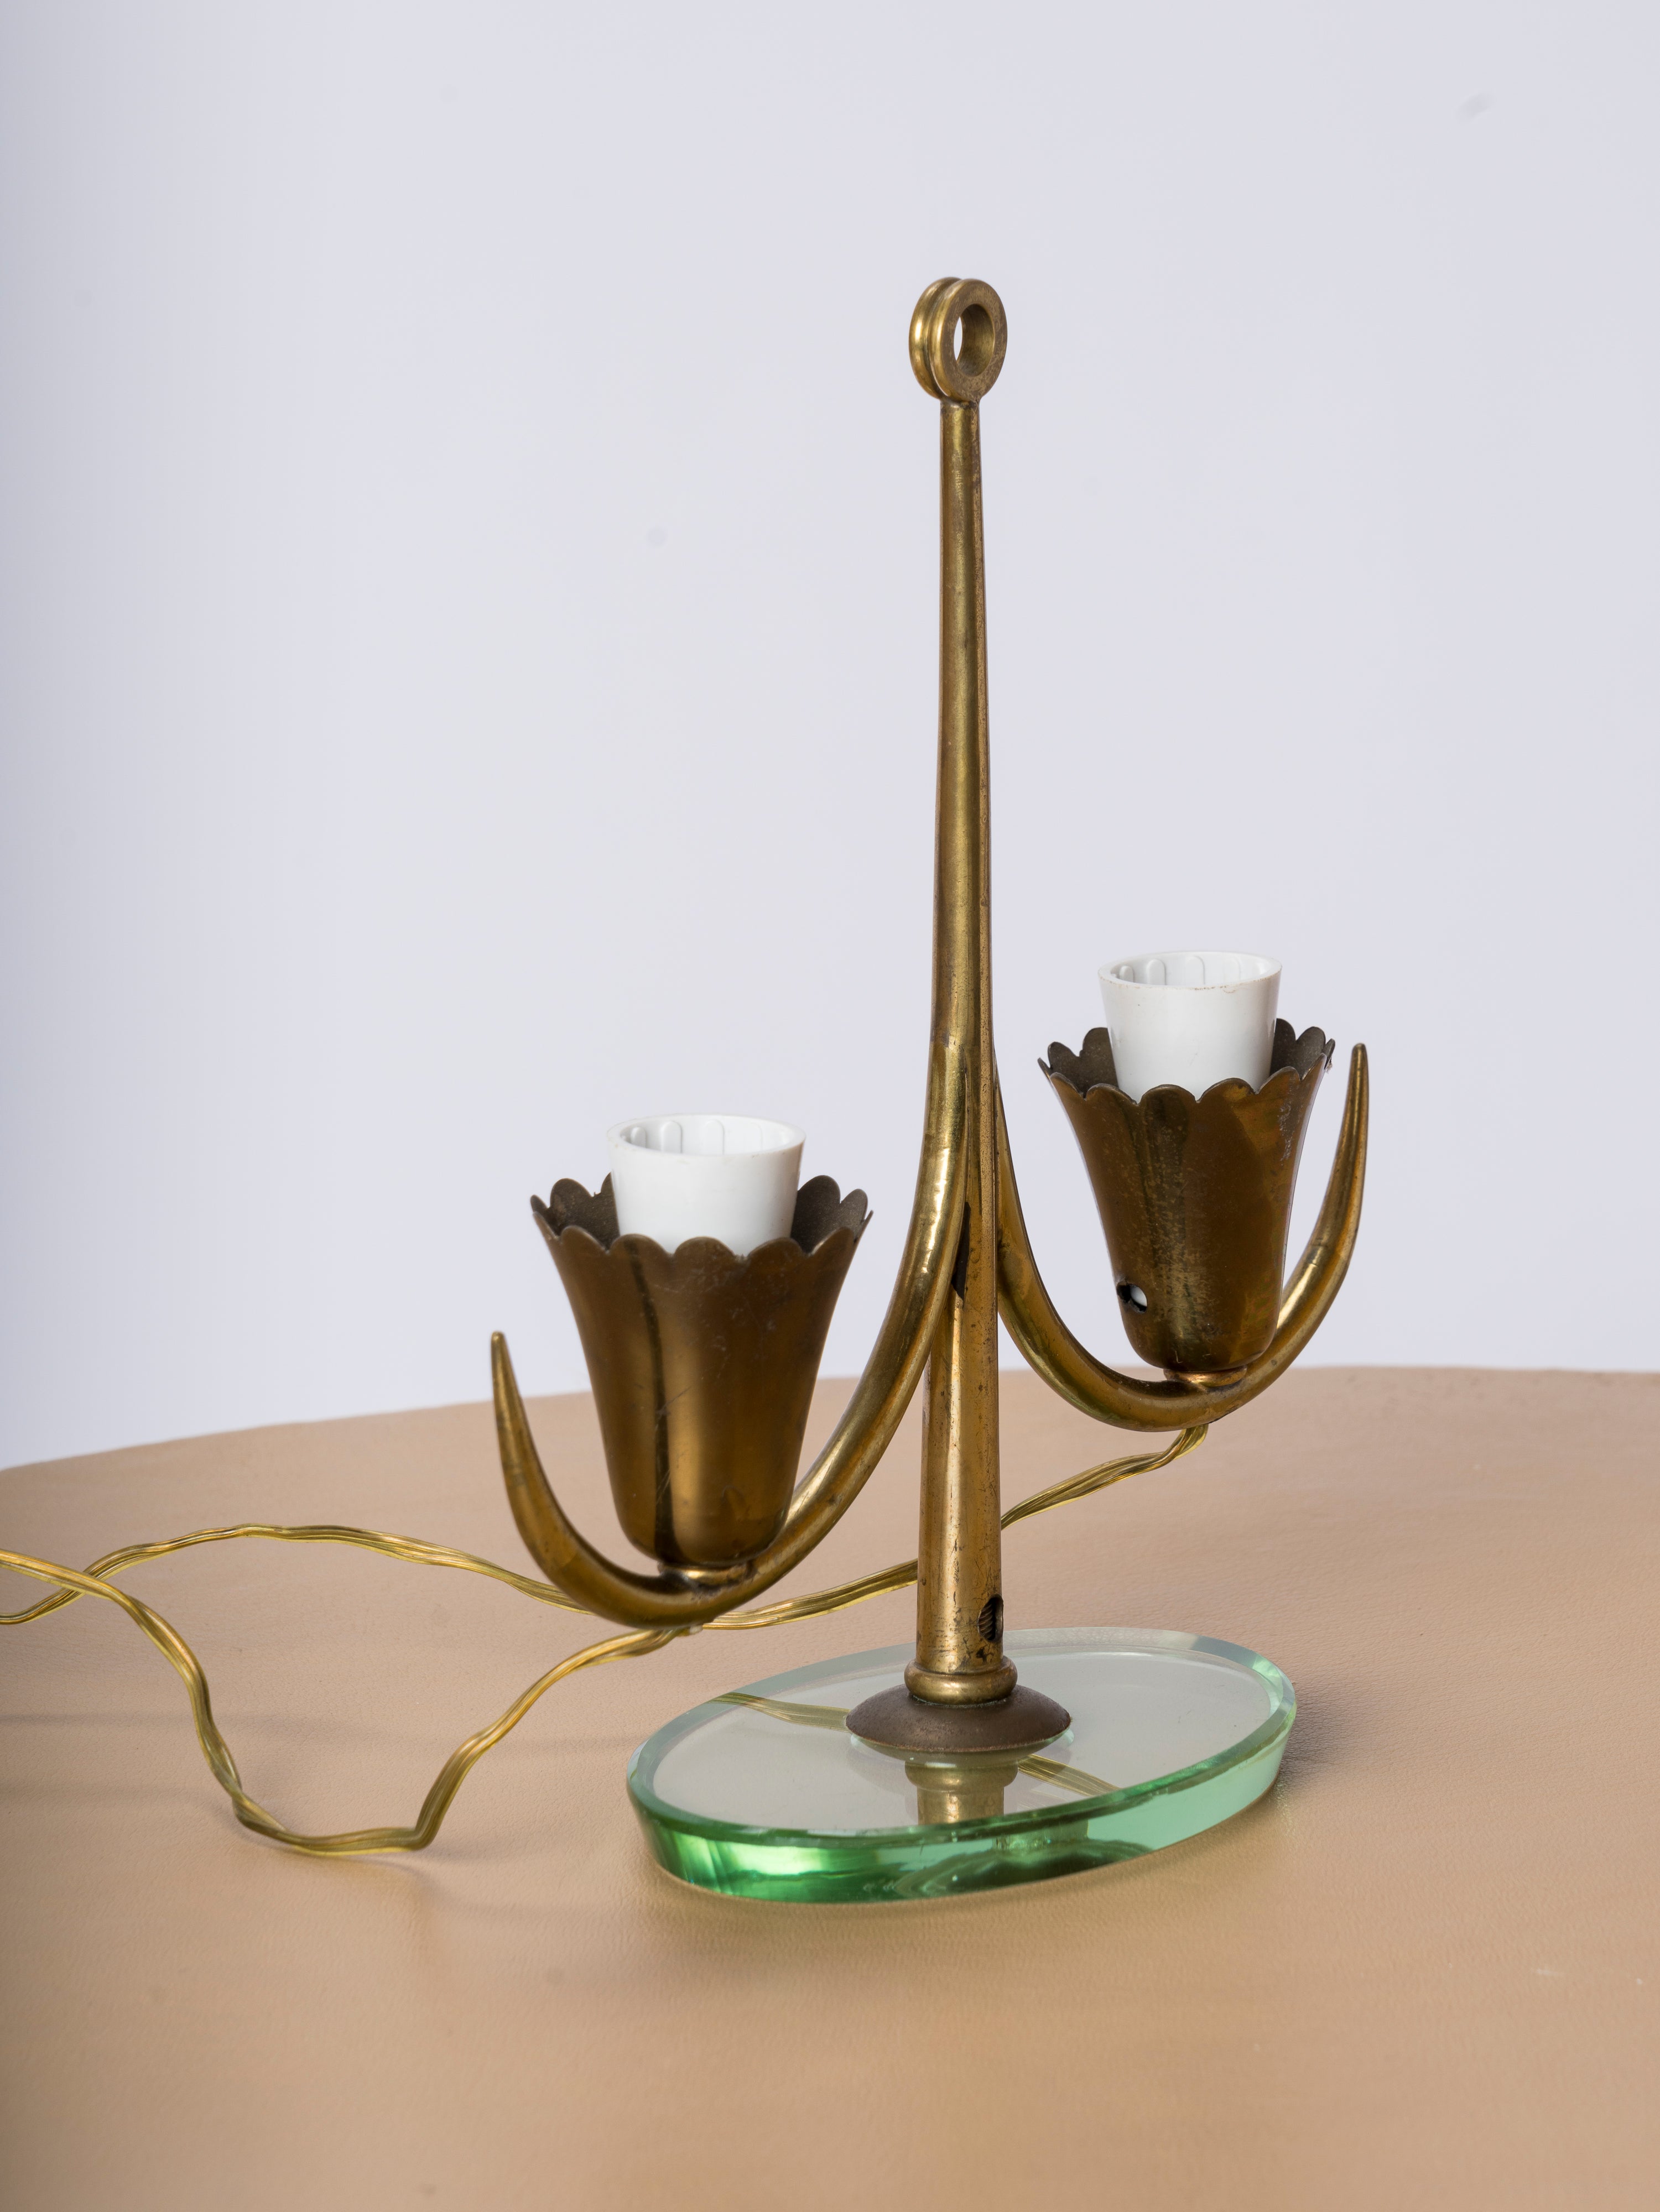 Elegant table lamp attributed to Fontana Arte. Typical of Italian lighting productions from the 50's. Features a light green tinted glass base and a brass pole with two sockets. In the style of Pietro Chiesa. European socket and wiring.